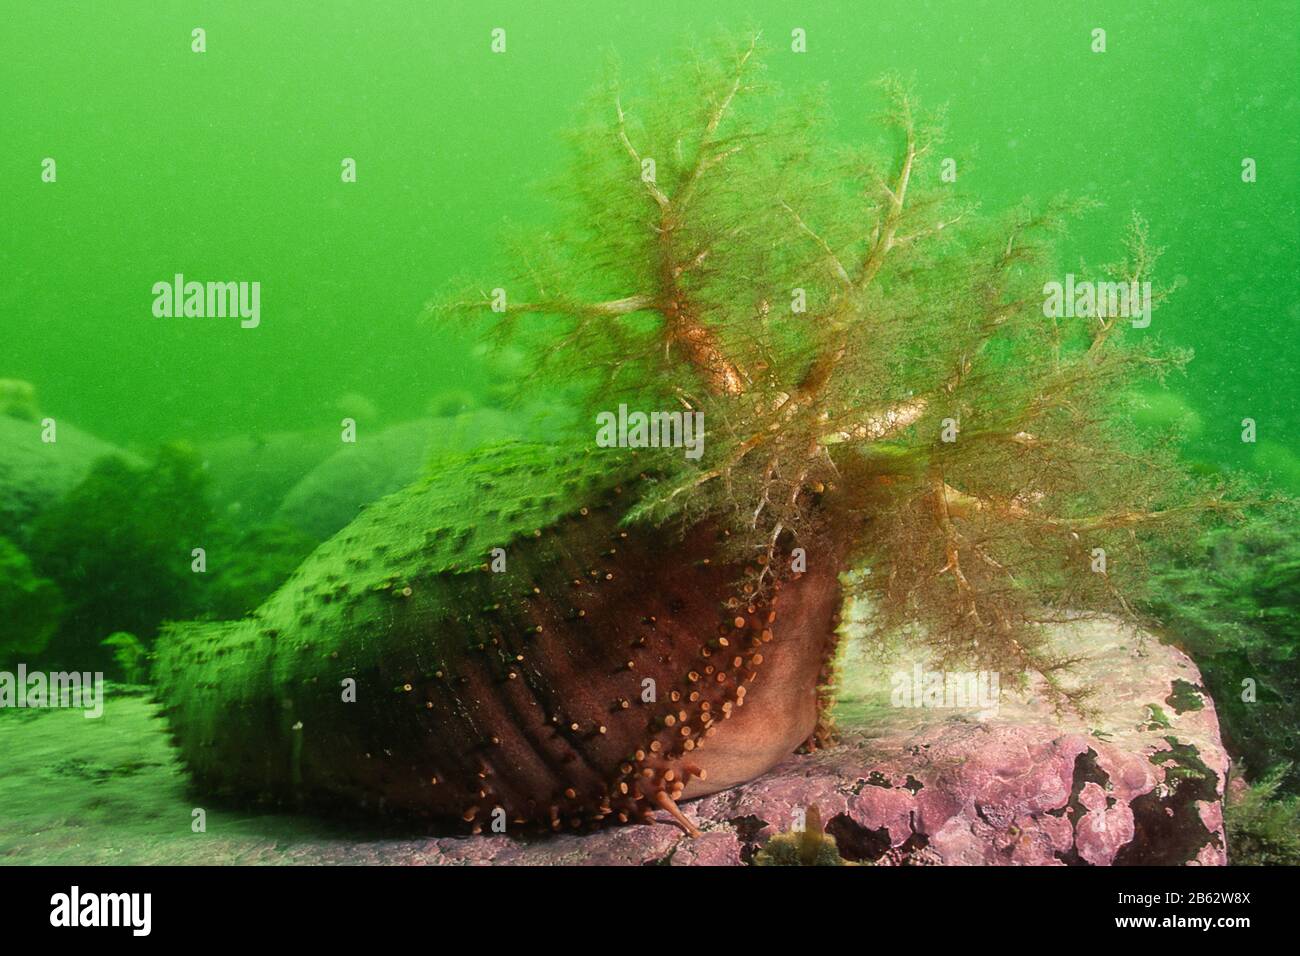 Orange Footed Sea Cucumber underwater in the St. Lawrence River Stock Photo